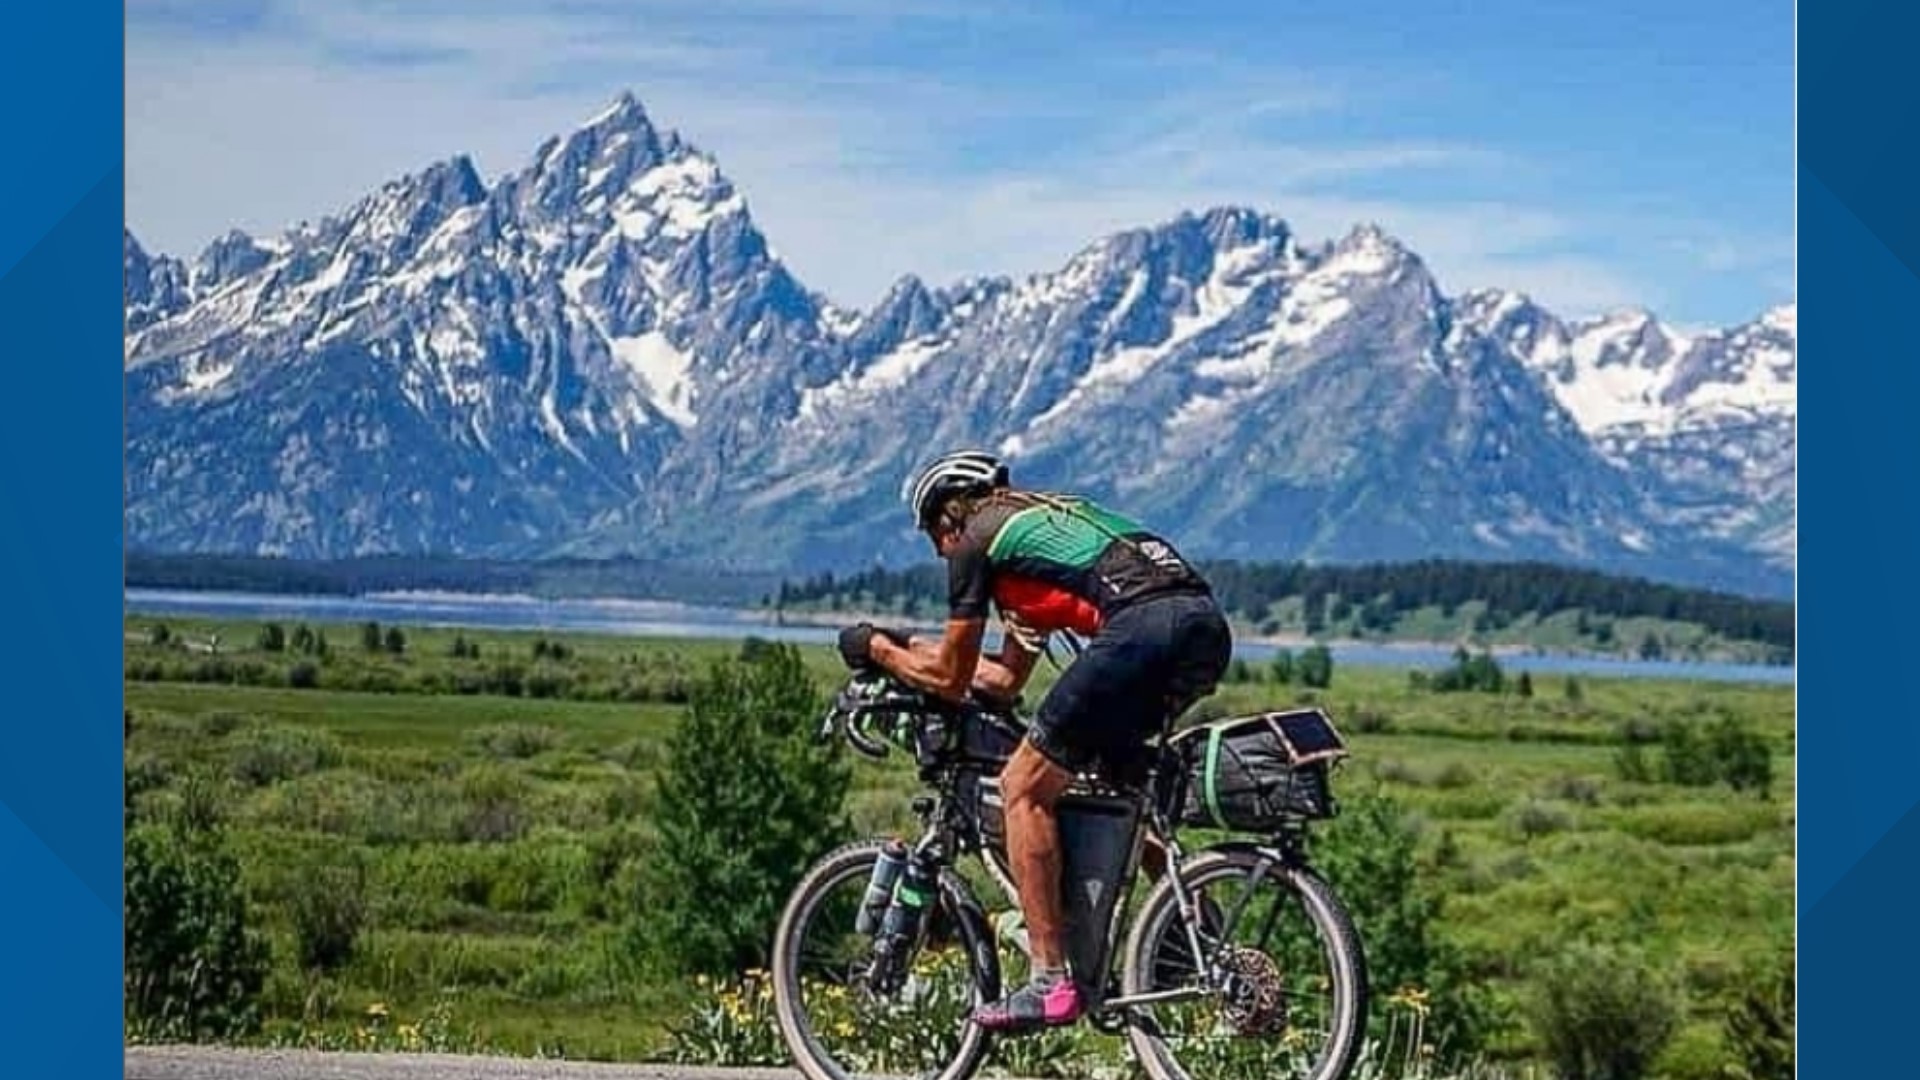 Brian Charette has spent the better part of the last five years completing some of the longest "bikepacking" routes in the world.